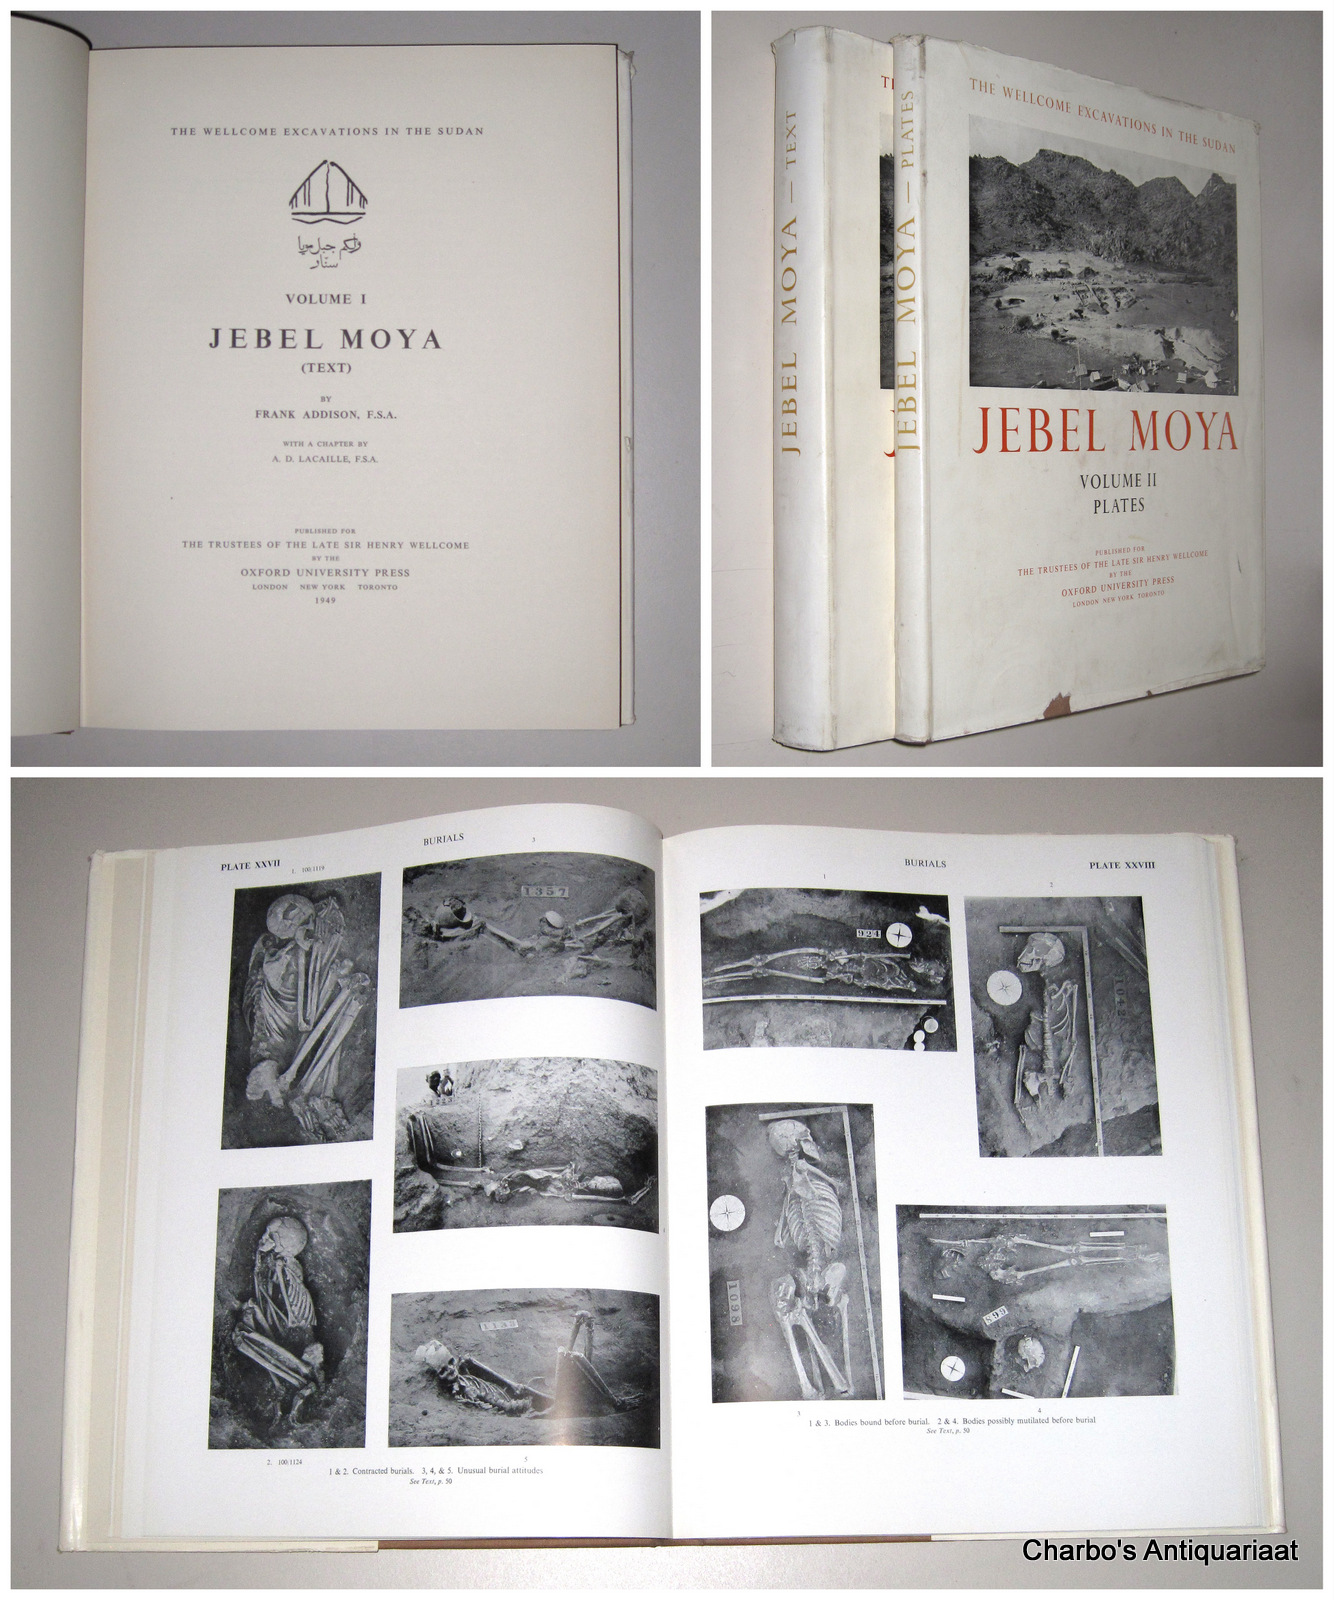 ADDISON, FRANK, -  Jebel Moya. Text & plates. (2 vol.set). With a chapter by A.D. Lacaille.